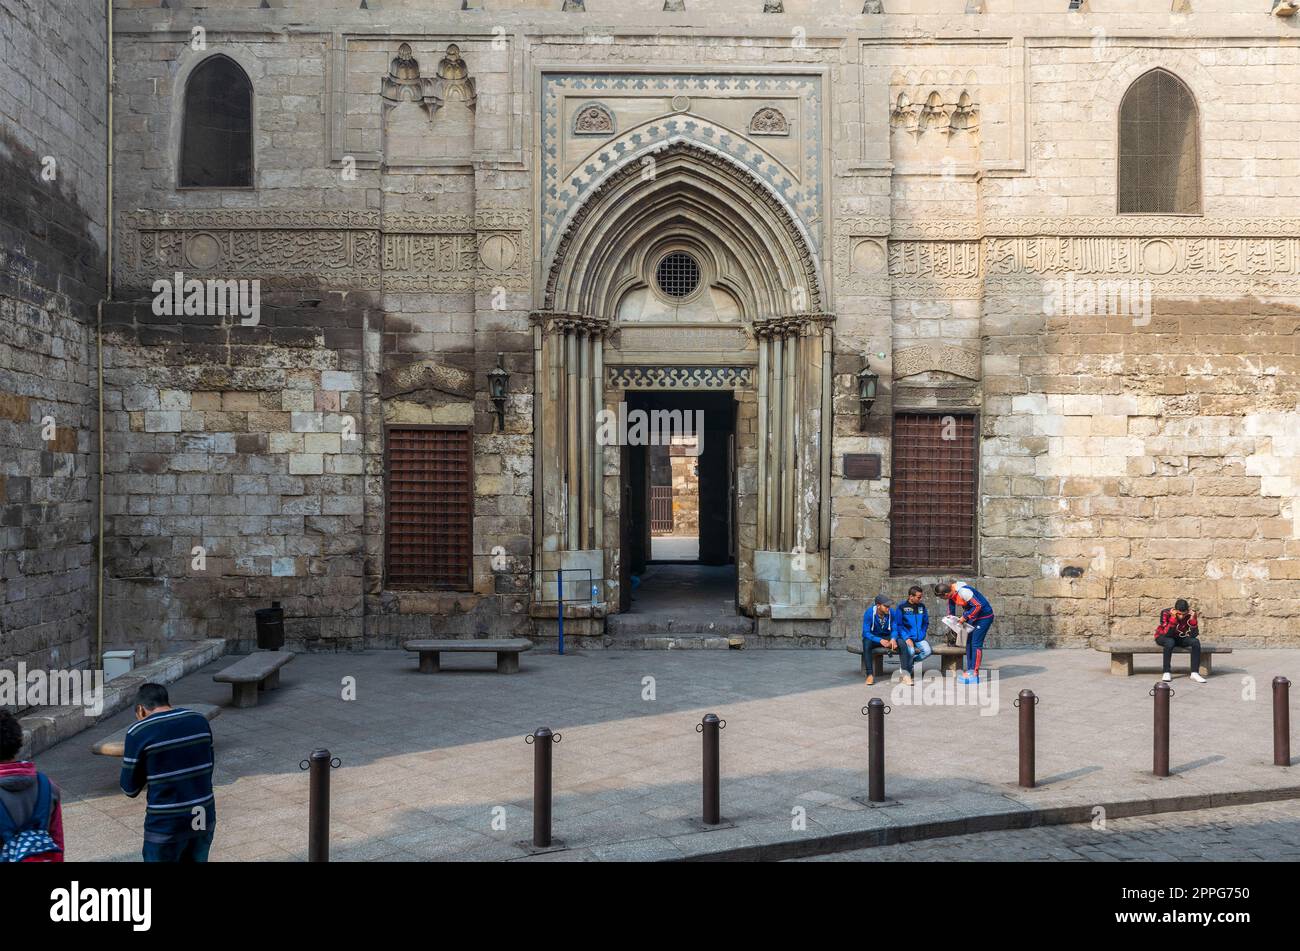 Entrance of theological school and Mausoleum of Sultan Qalawun, Cairo, Egypt Stock Photo